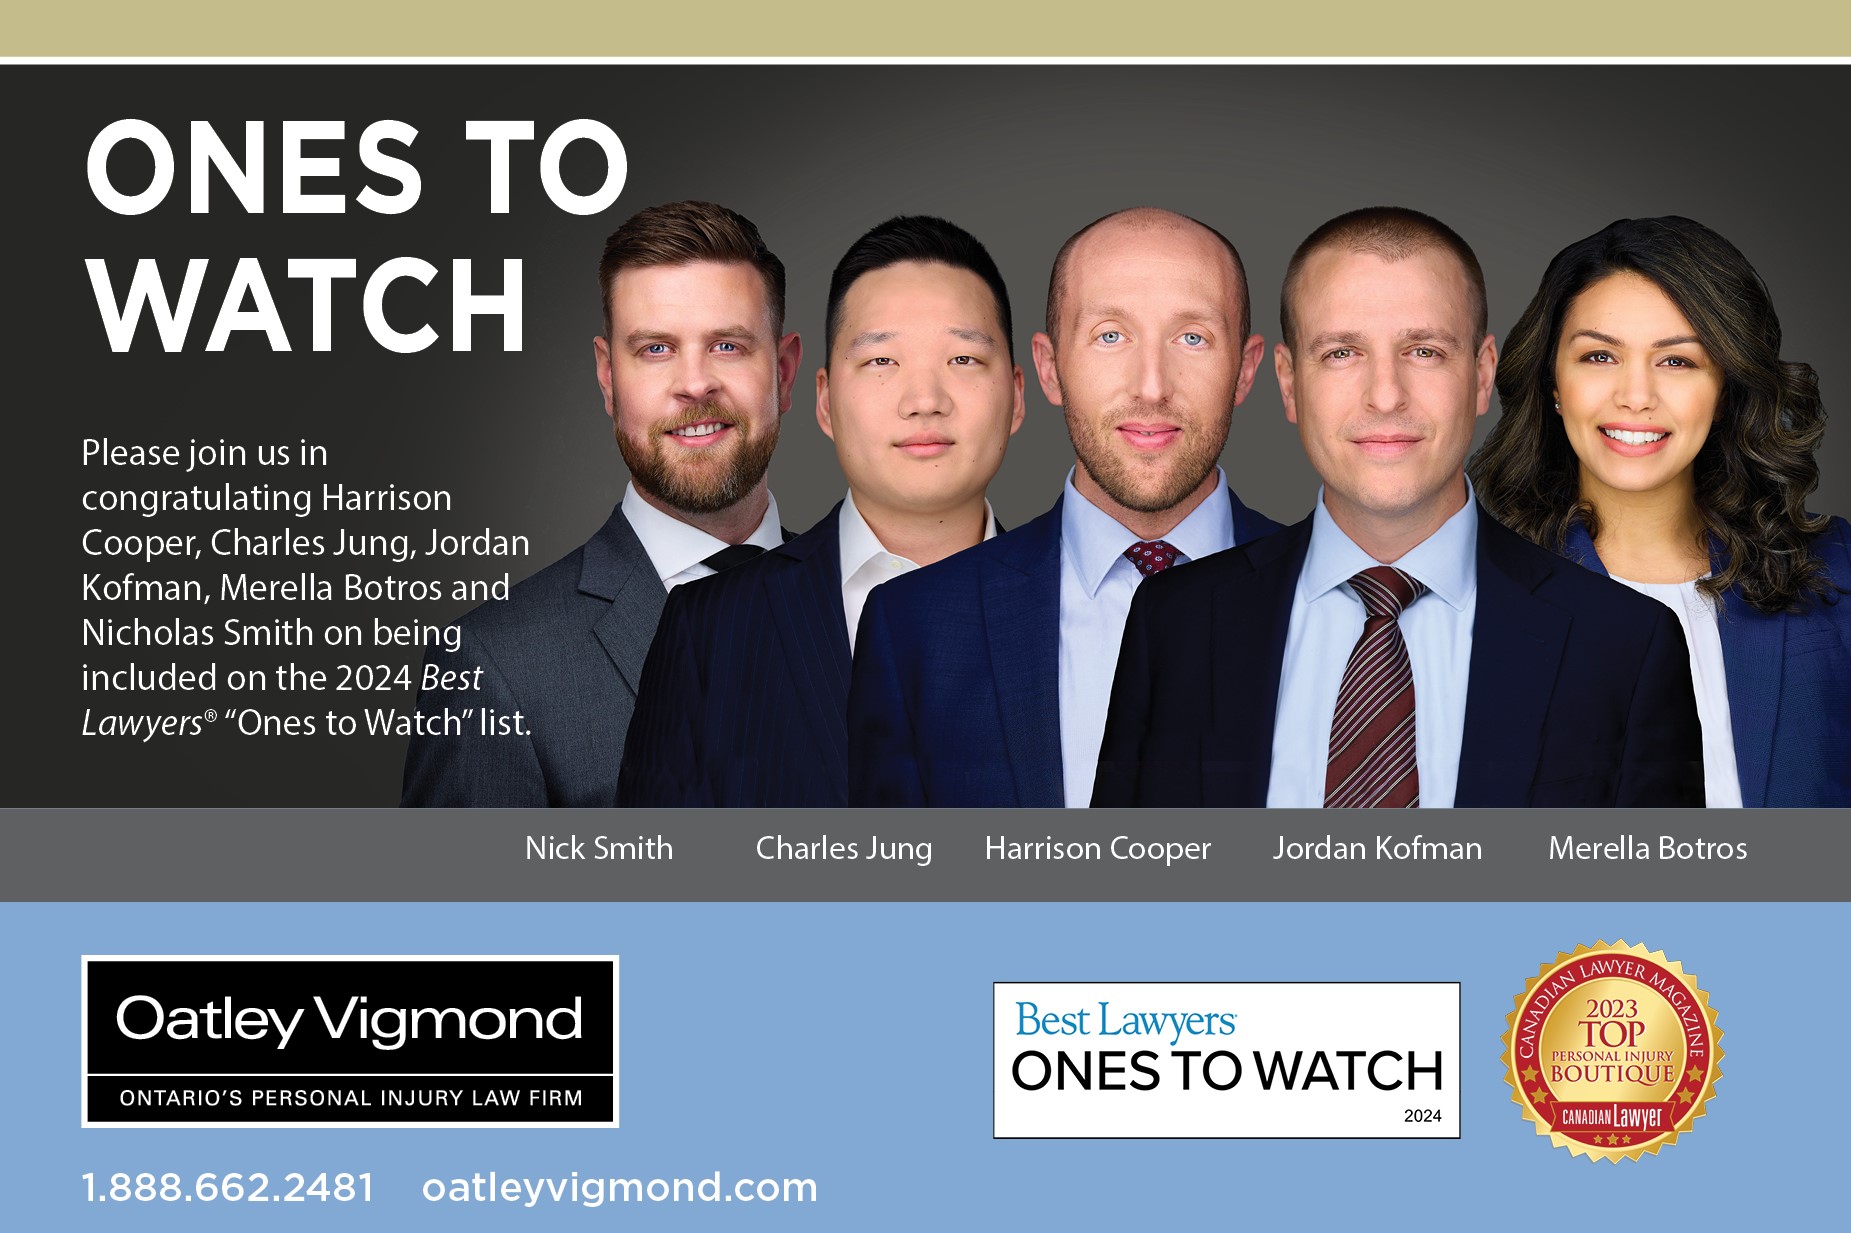 Five Oatley Vigmond Associates Named “Ones to Watch” by Best Lawyers® for 2024